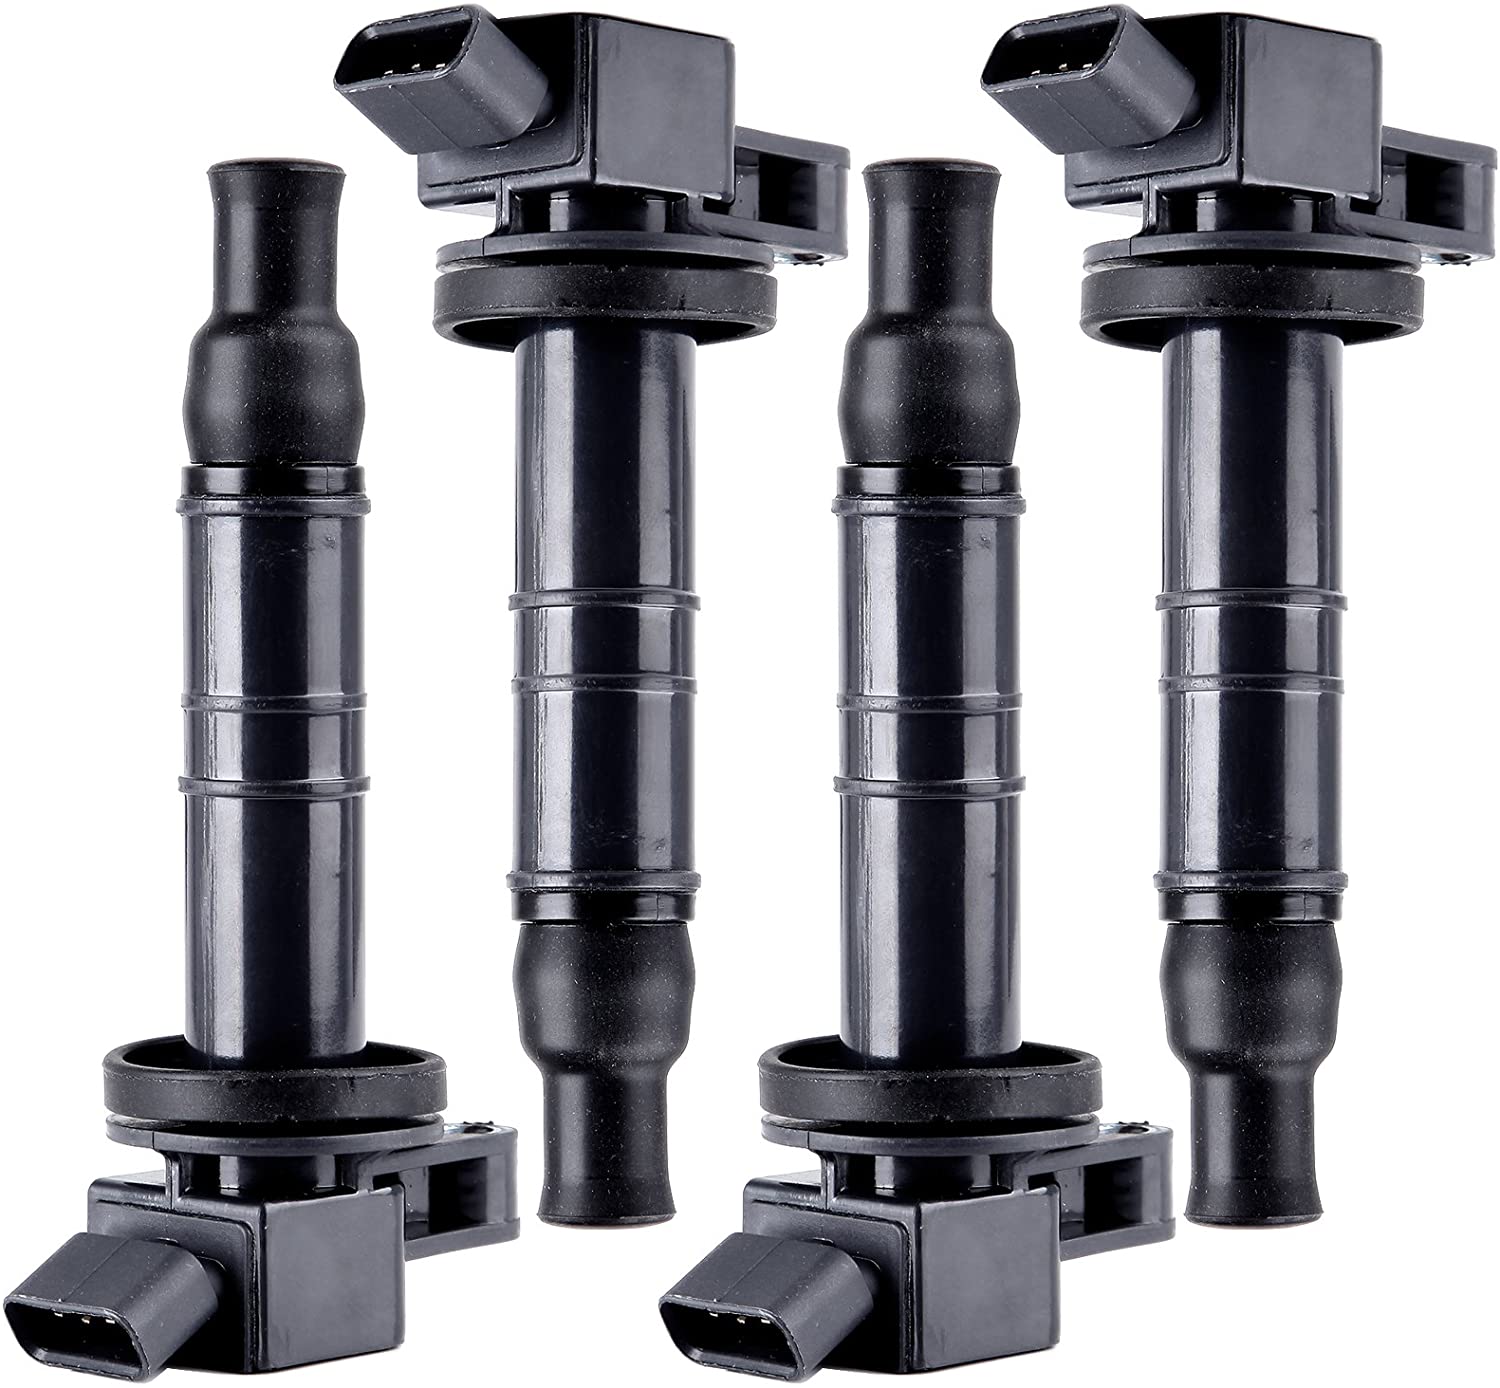 FINDAUTO Pack of 4 Ignition Coil Fits for Lexu-s HS250H/P-ontiac Vibe/Scio-n TC/Toyot-a 2001-2012 Replacement with OE: UF333 C1330